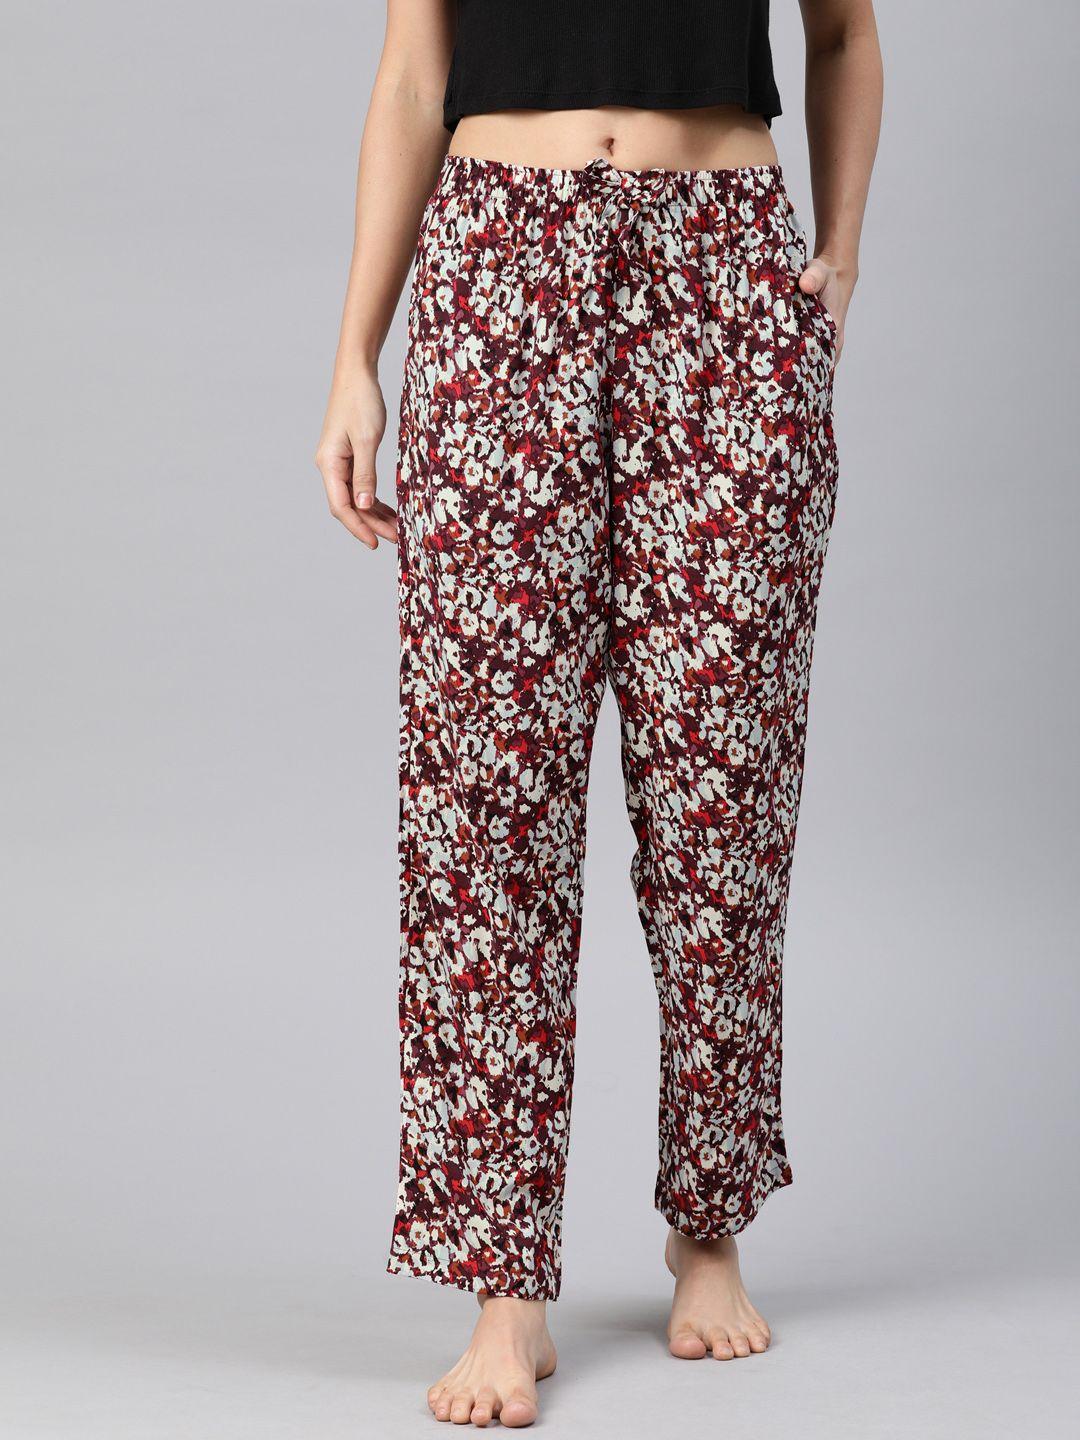 drape in vogue women maroon & off-white printed relaxed fit lounge pants